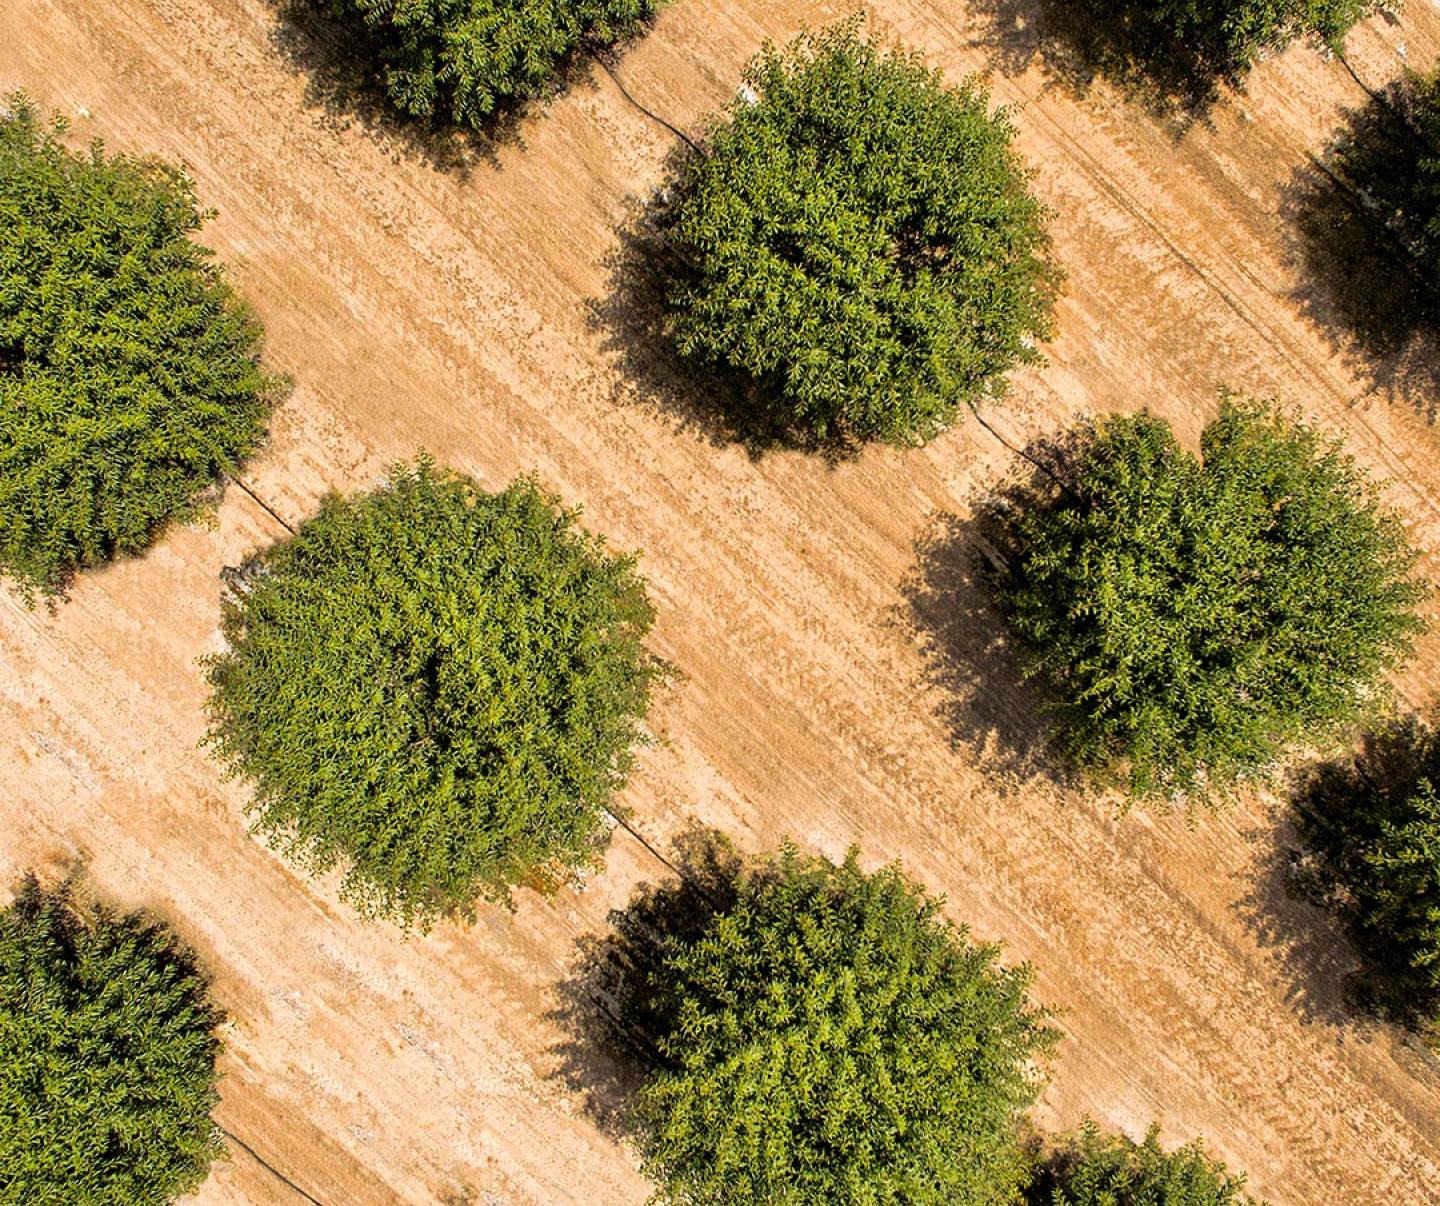 Aerial of almond trees in field